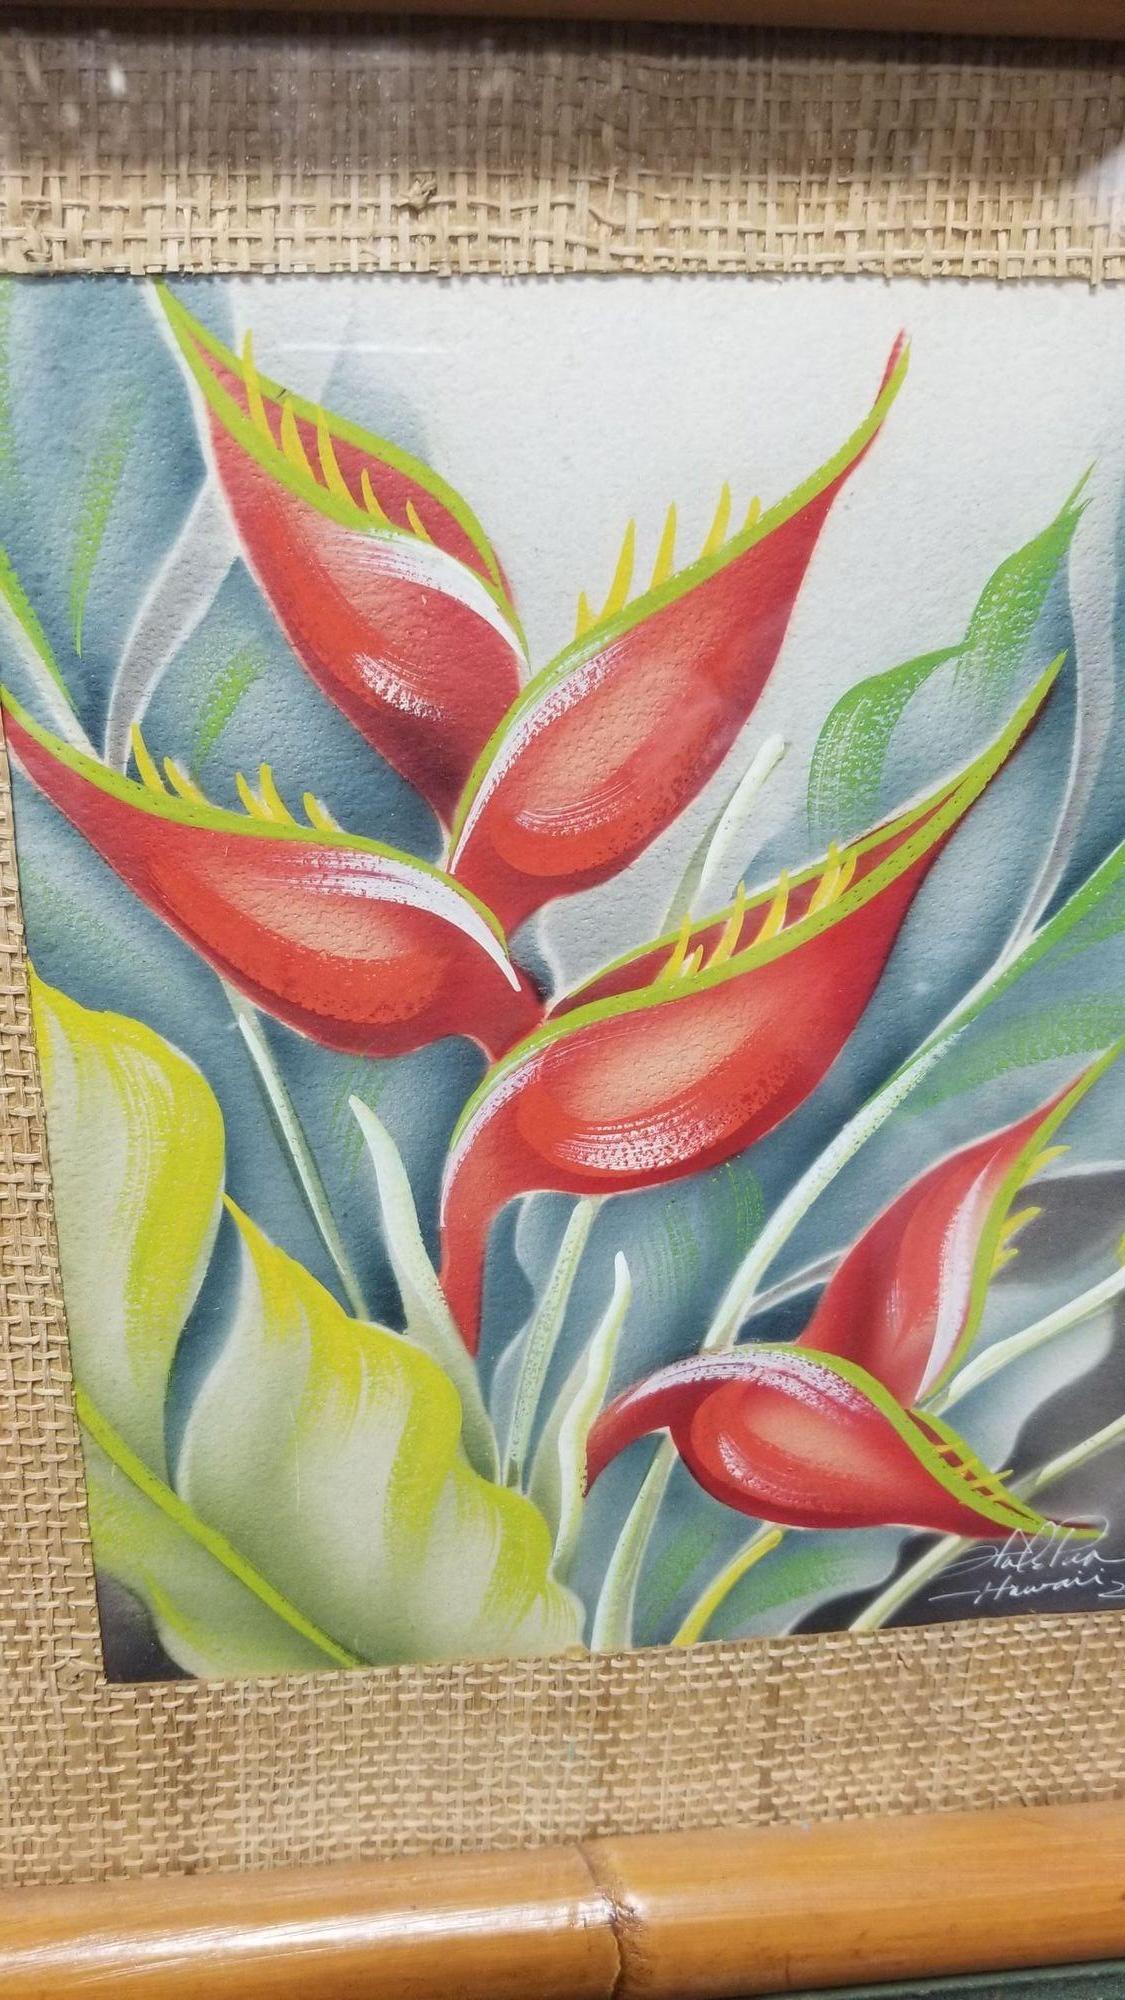 A vintage mid-century framed artwork painting of the Heliconia flower. Signed 